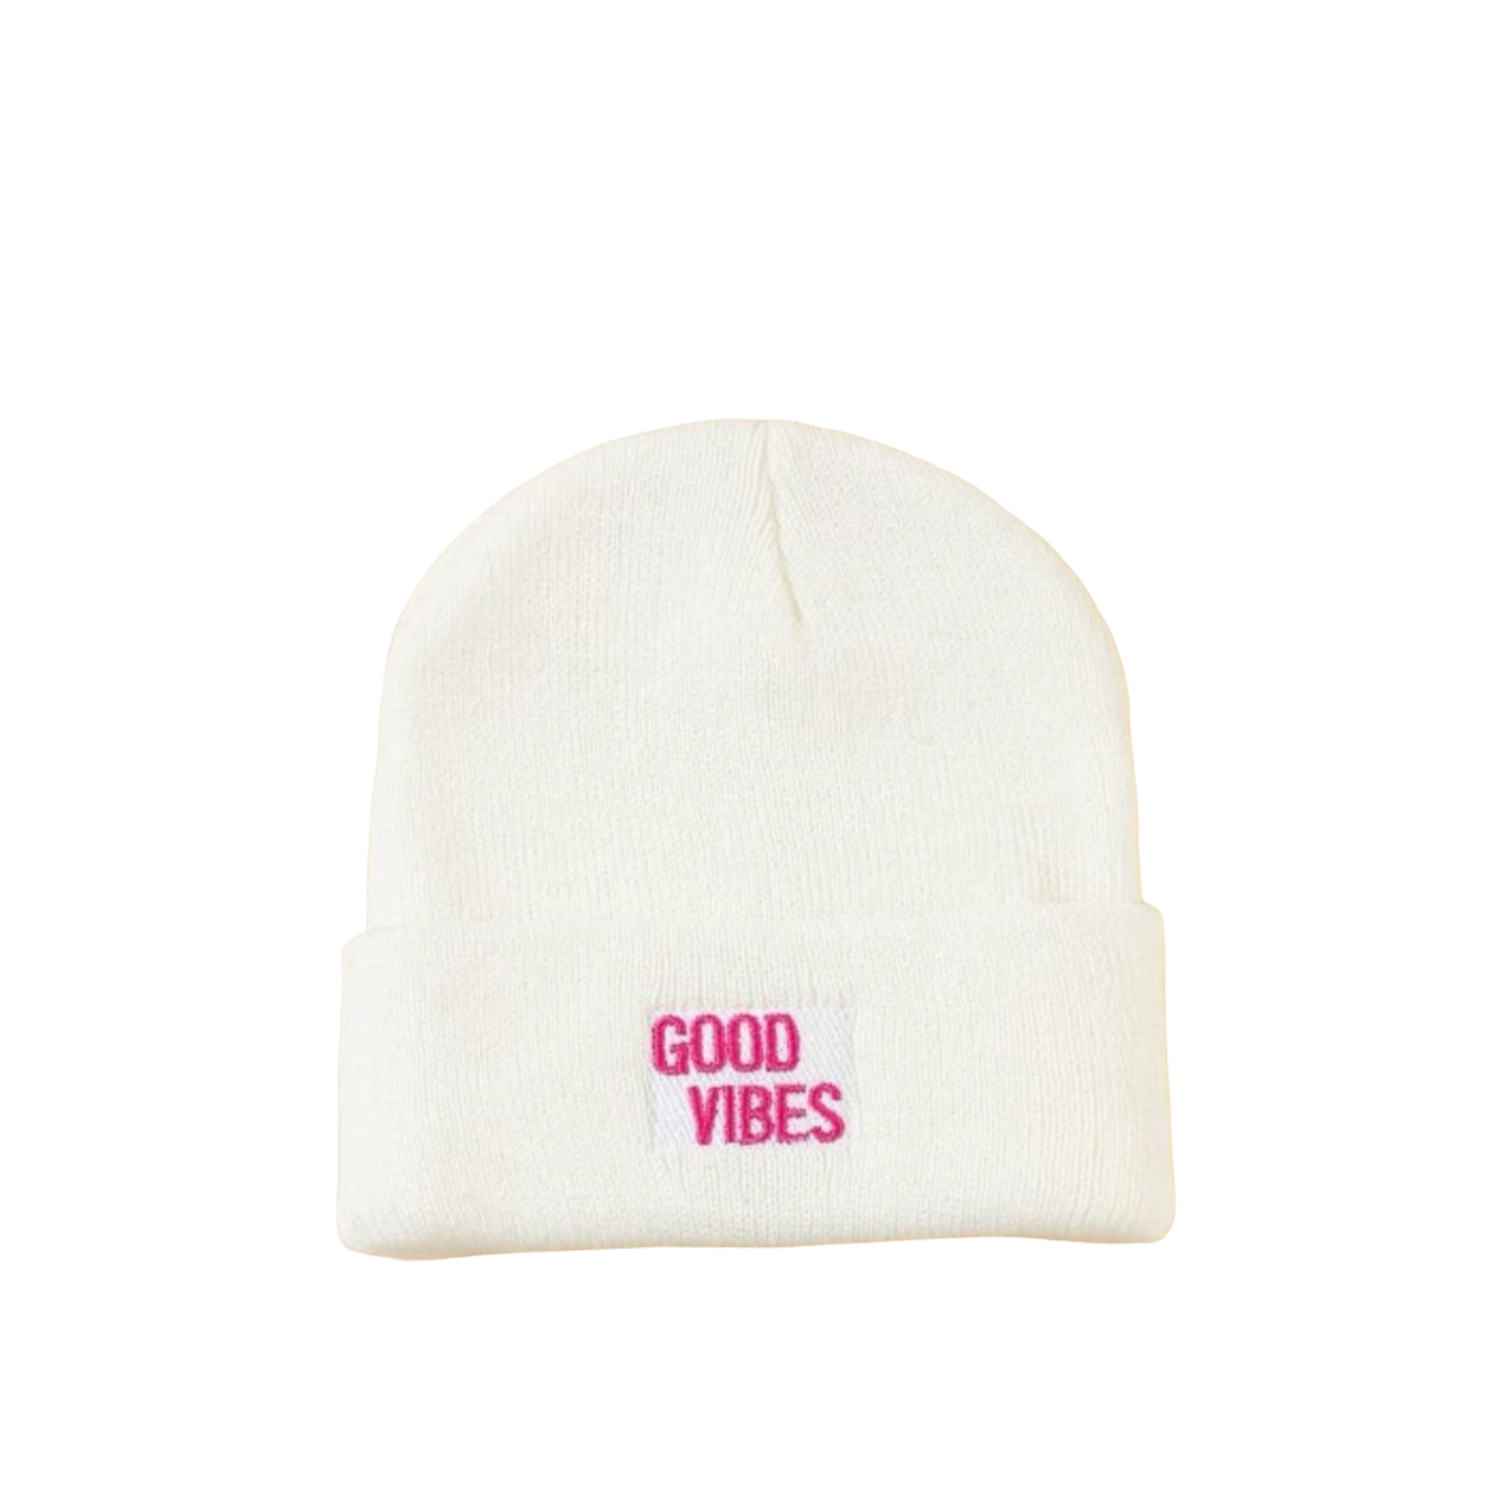 Good vibes beanie hats - color White, Black - TheSinners2Saints